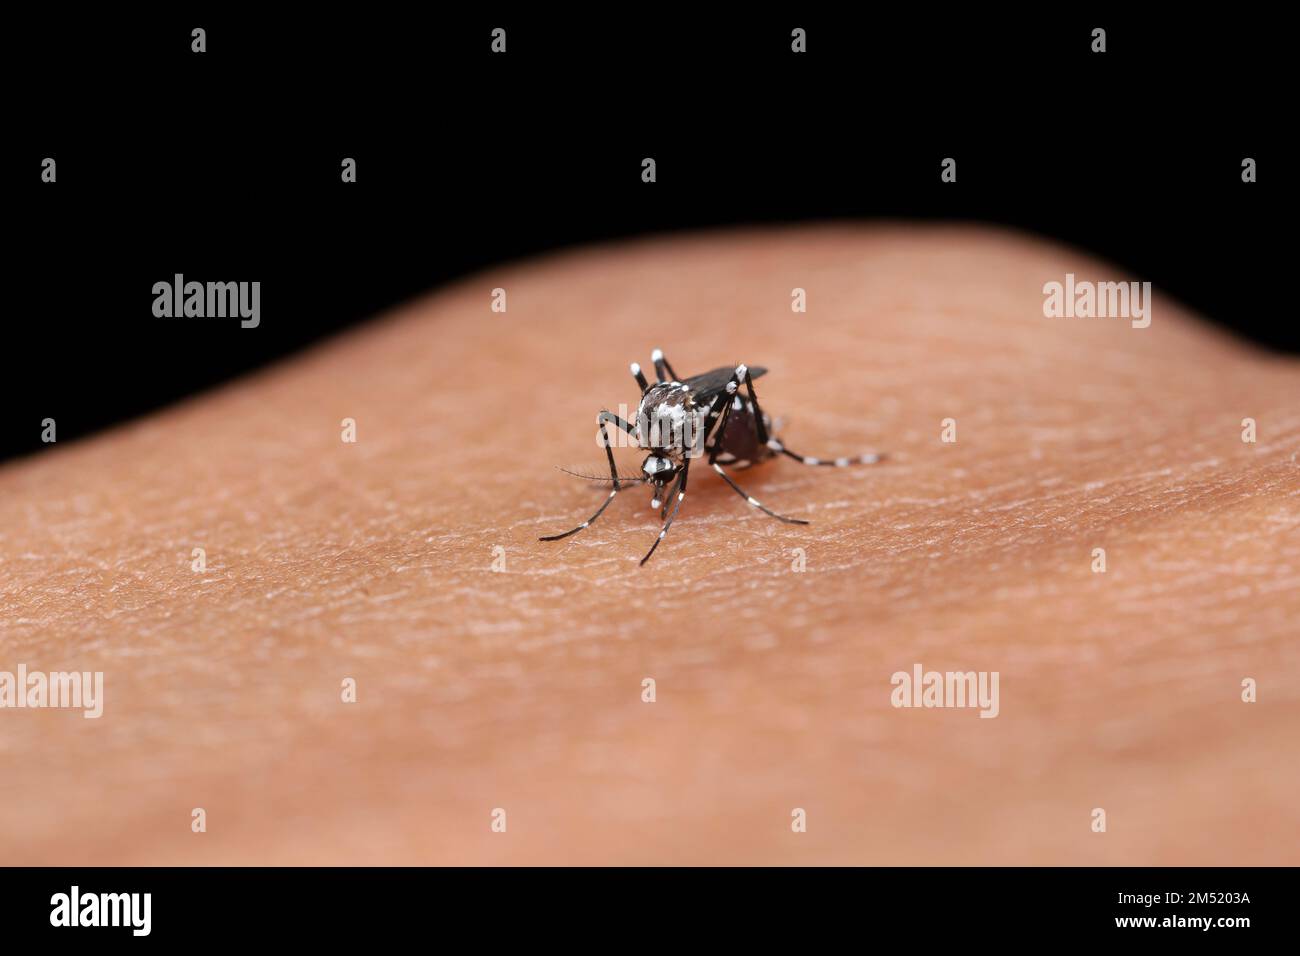 A female dengue mosquito (Aedes aegypti) biting on hand Stock Photo